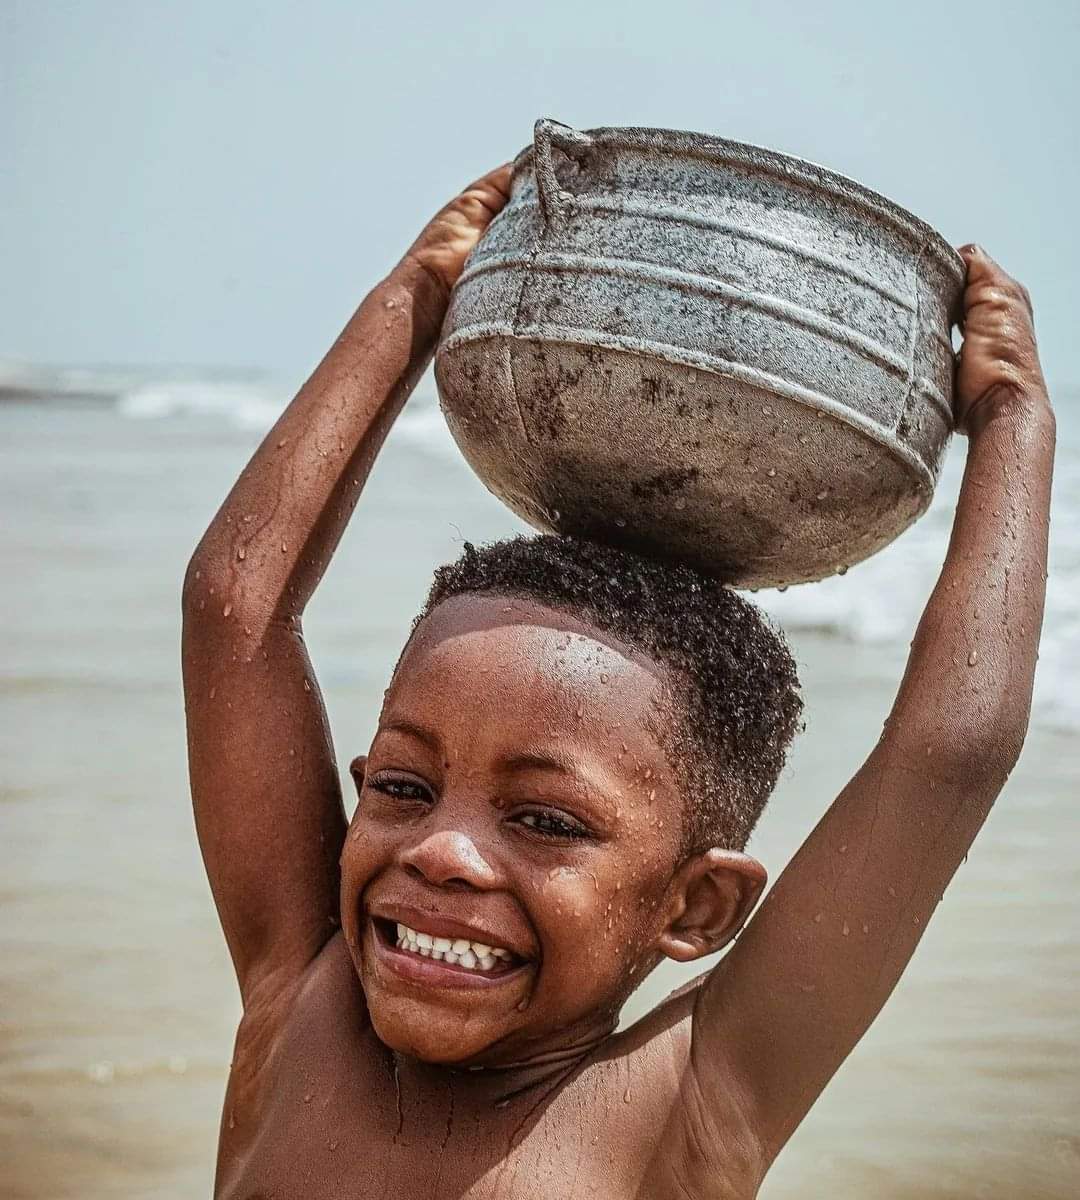 Happy New Month Folks! 

We're looking forward to using and promoting more of our locally made eco-friendly utensils ❤️🇬🇭

📸 Reposted from @serwahphotography 

#HappyJune #Happiness #GhanaianChild #Dadesɛn #EcofriendlyHabits #EcofriendlyUtensils #GhanaianFoodNetwork